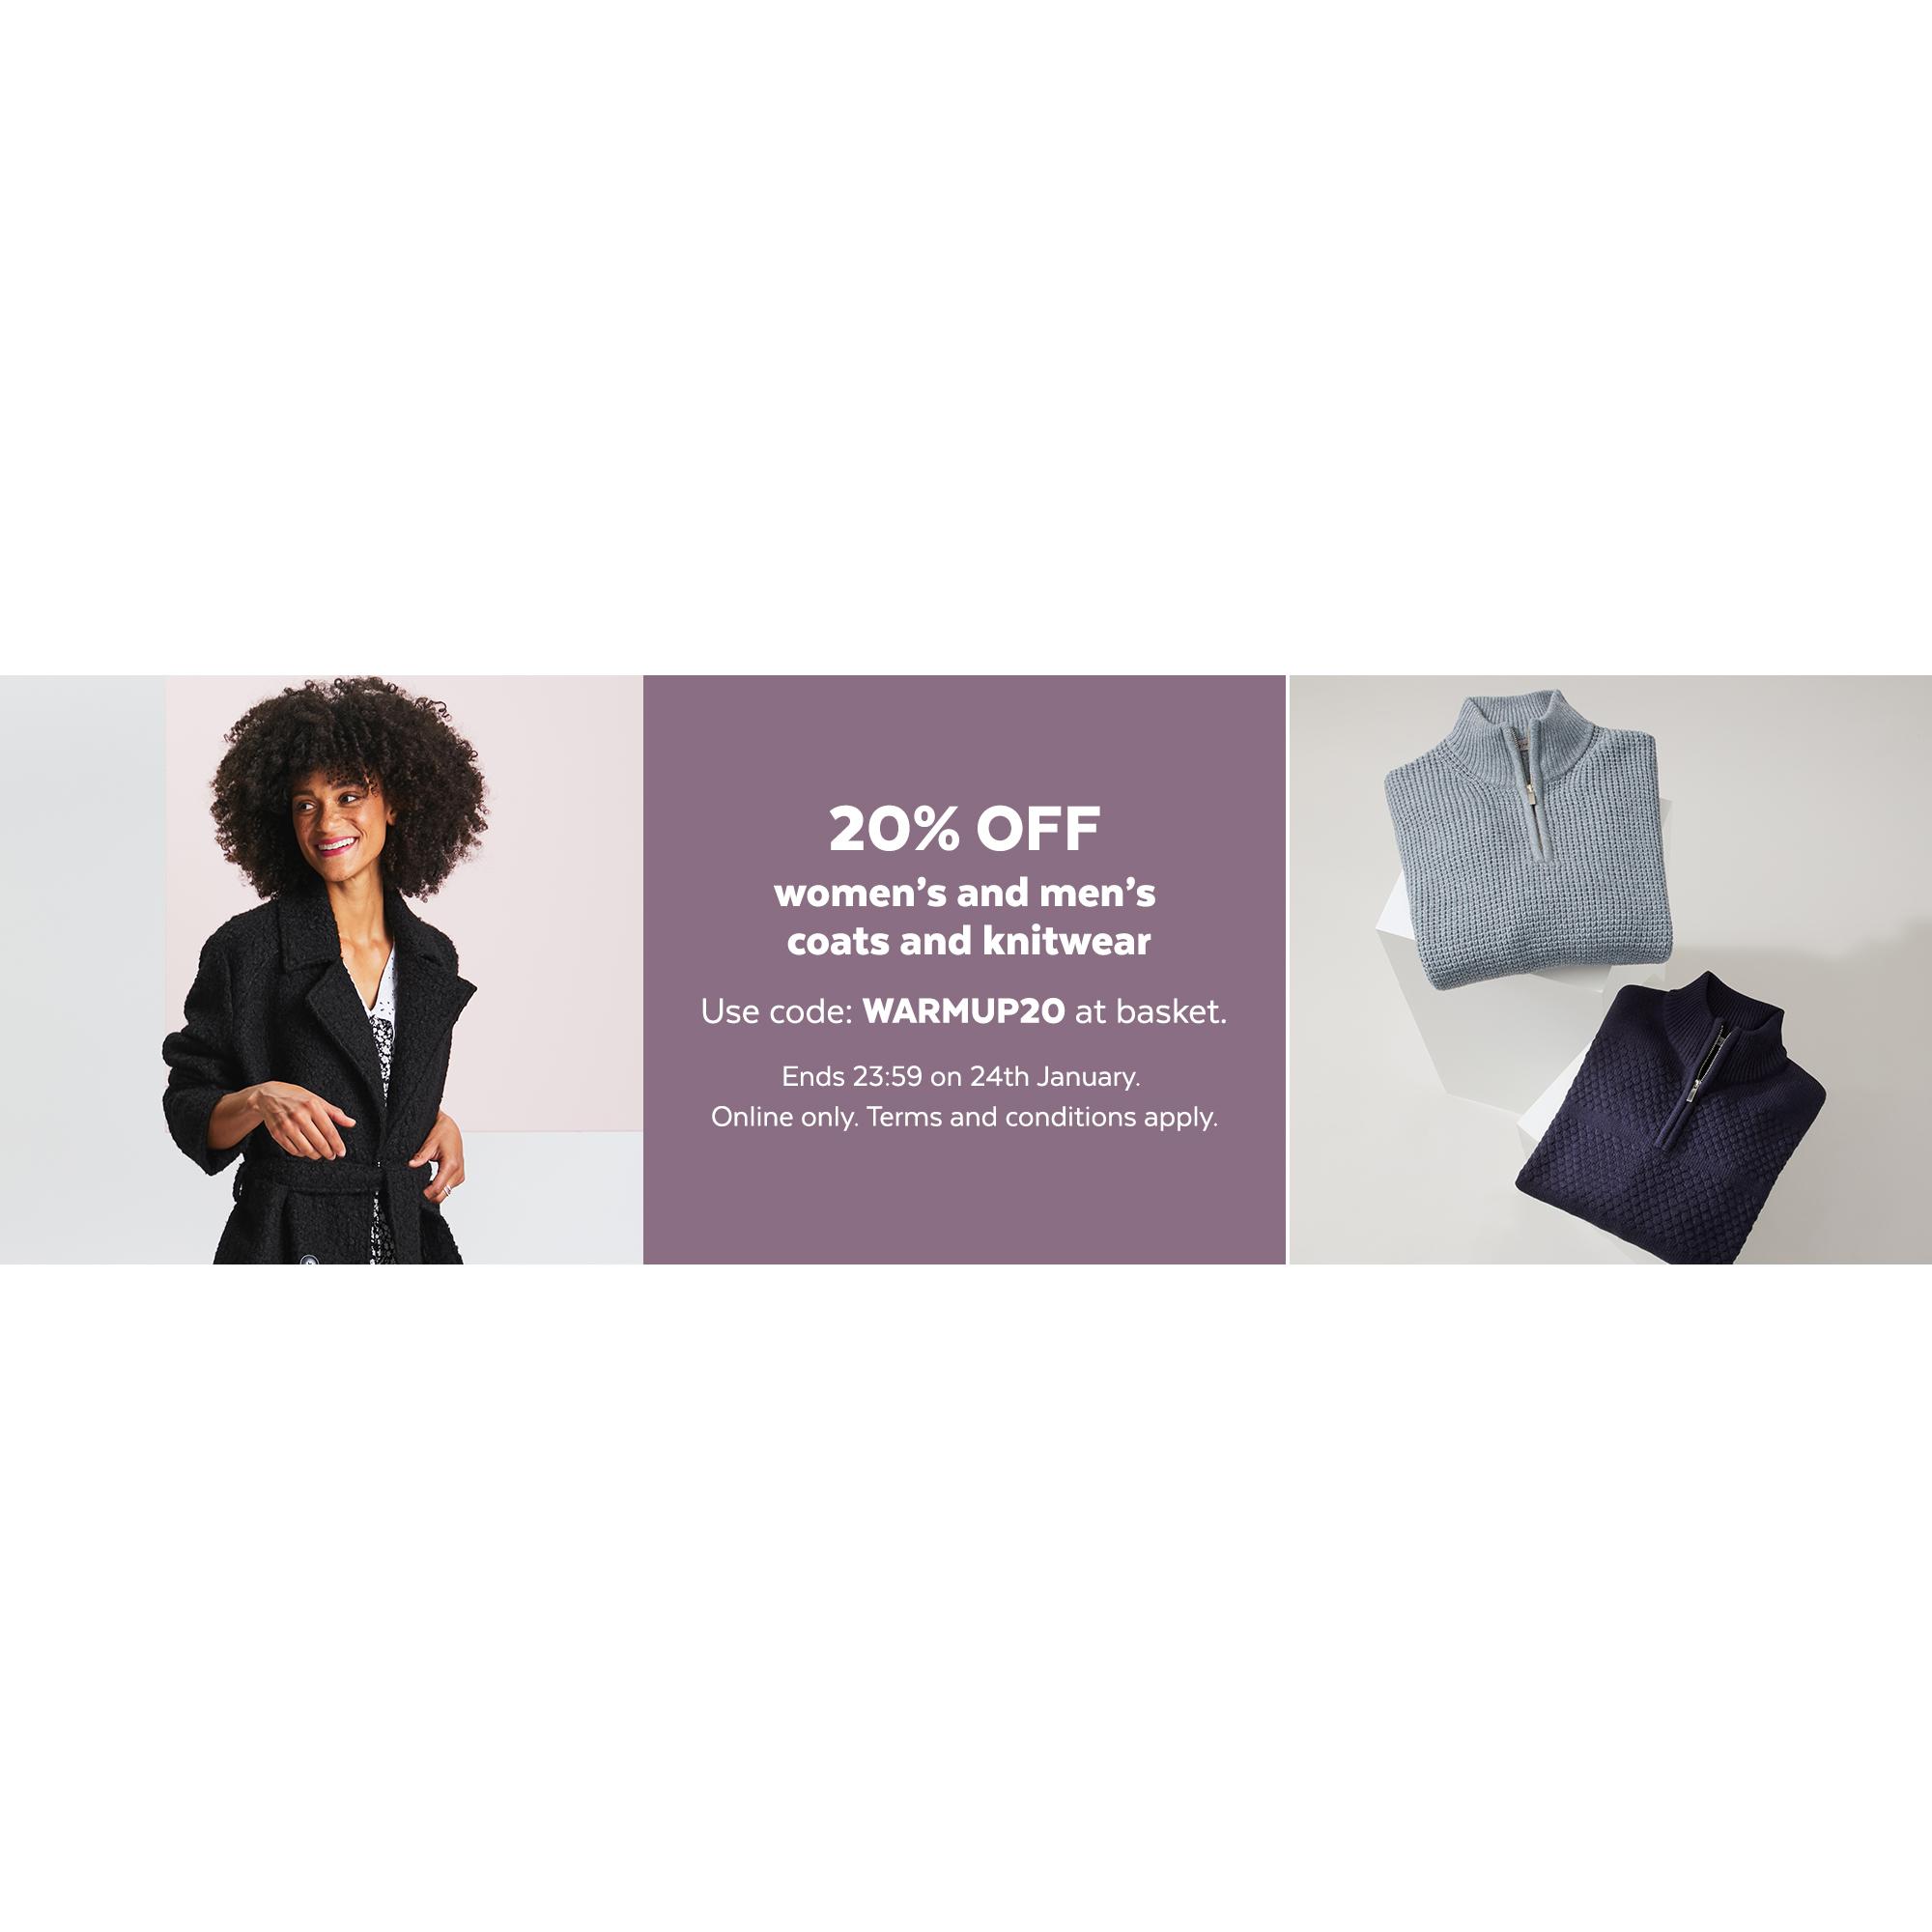 20% off women's and men's coats and knitwear. Use code - WARMUP20 at basket. Ends 23:59 24th January. Online only. T&C's apply.